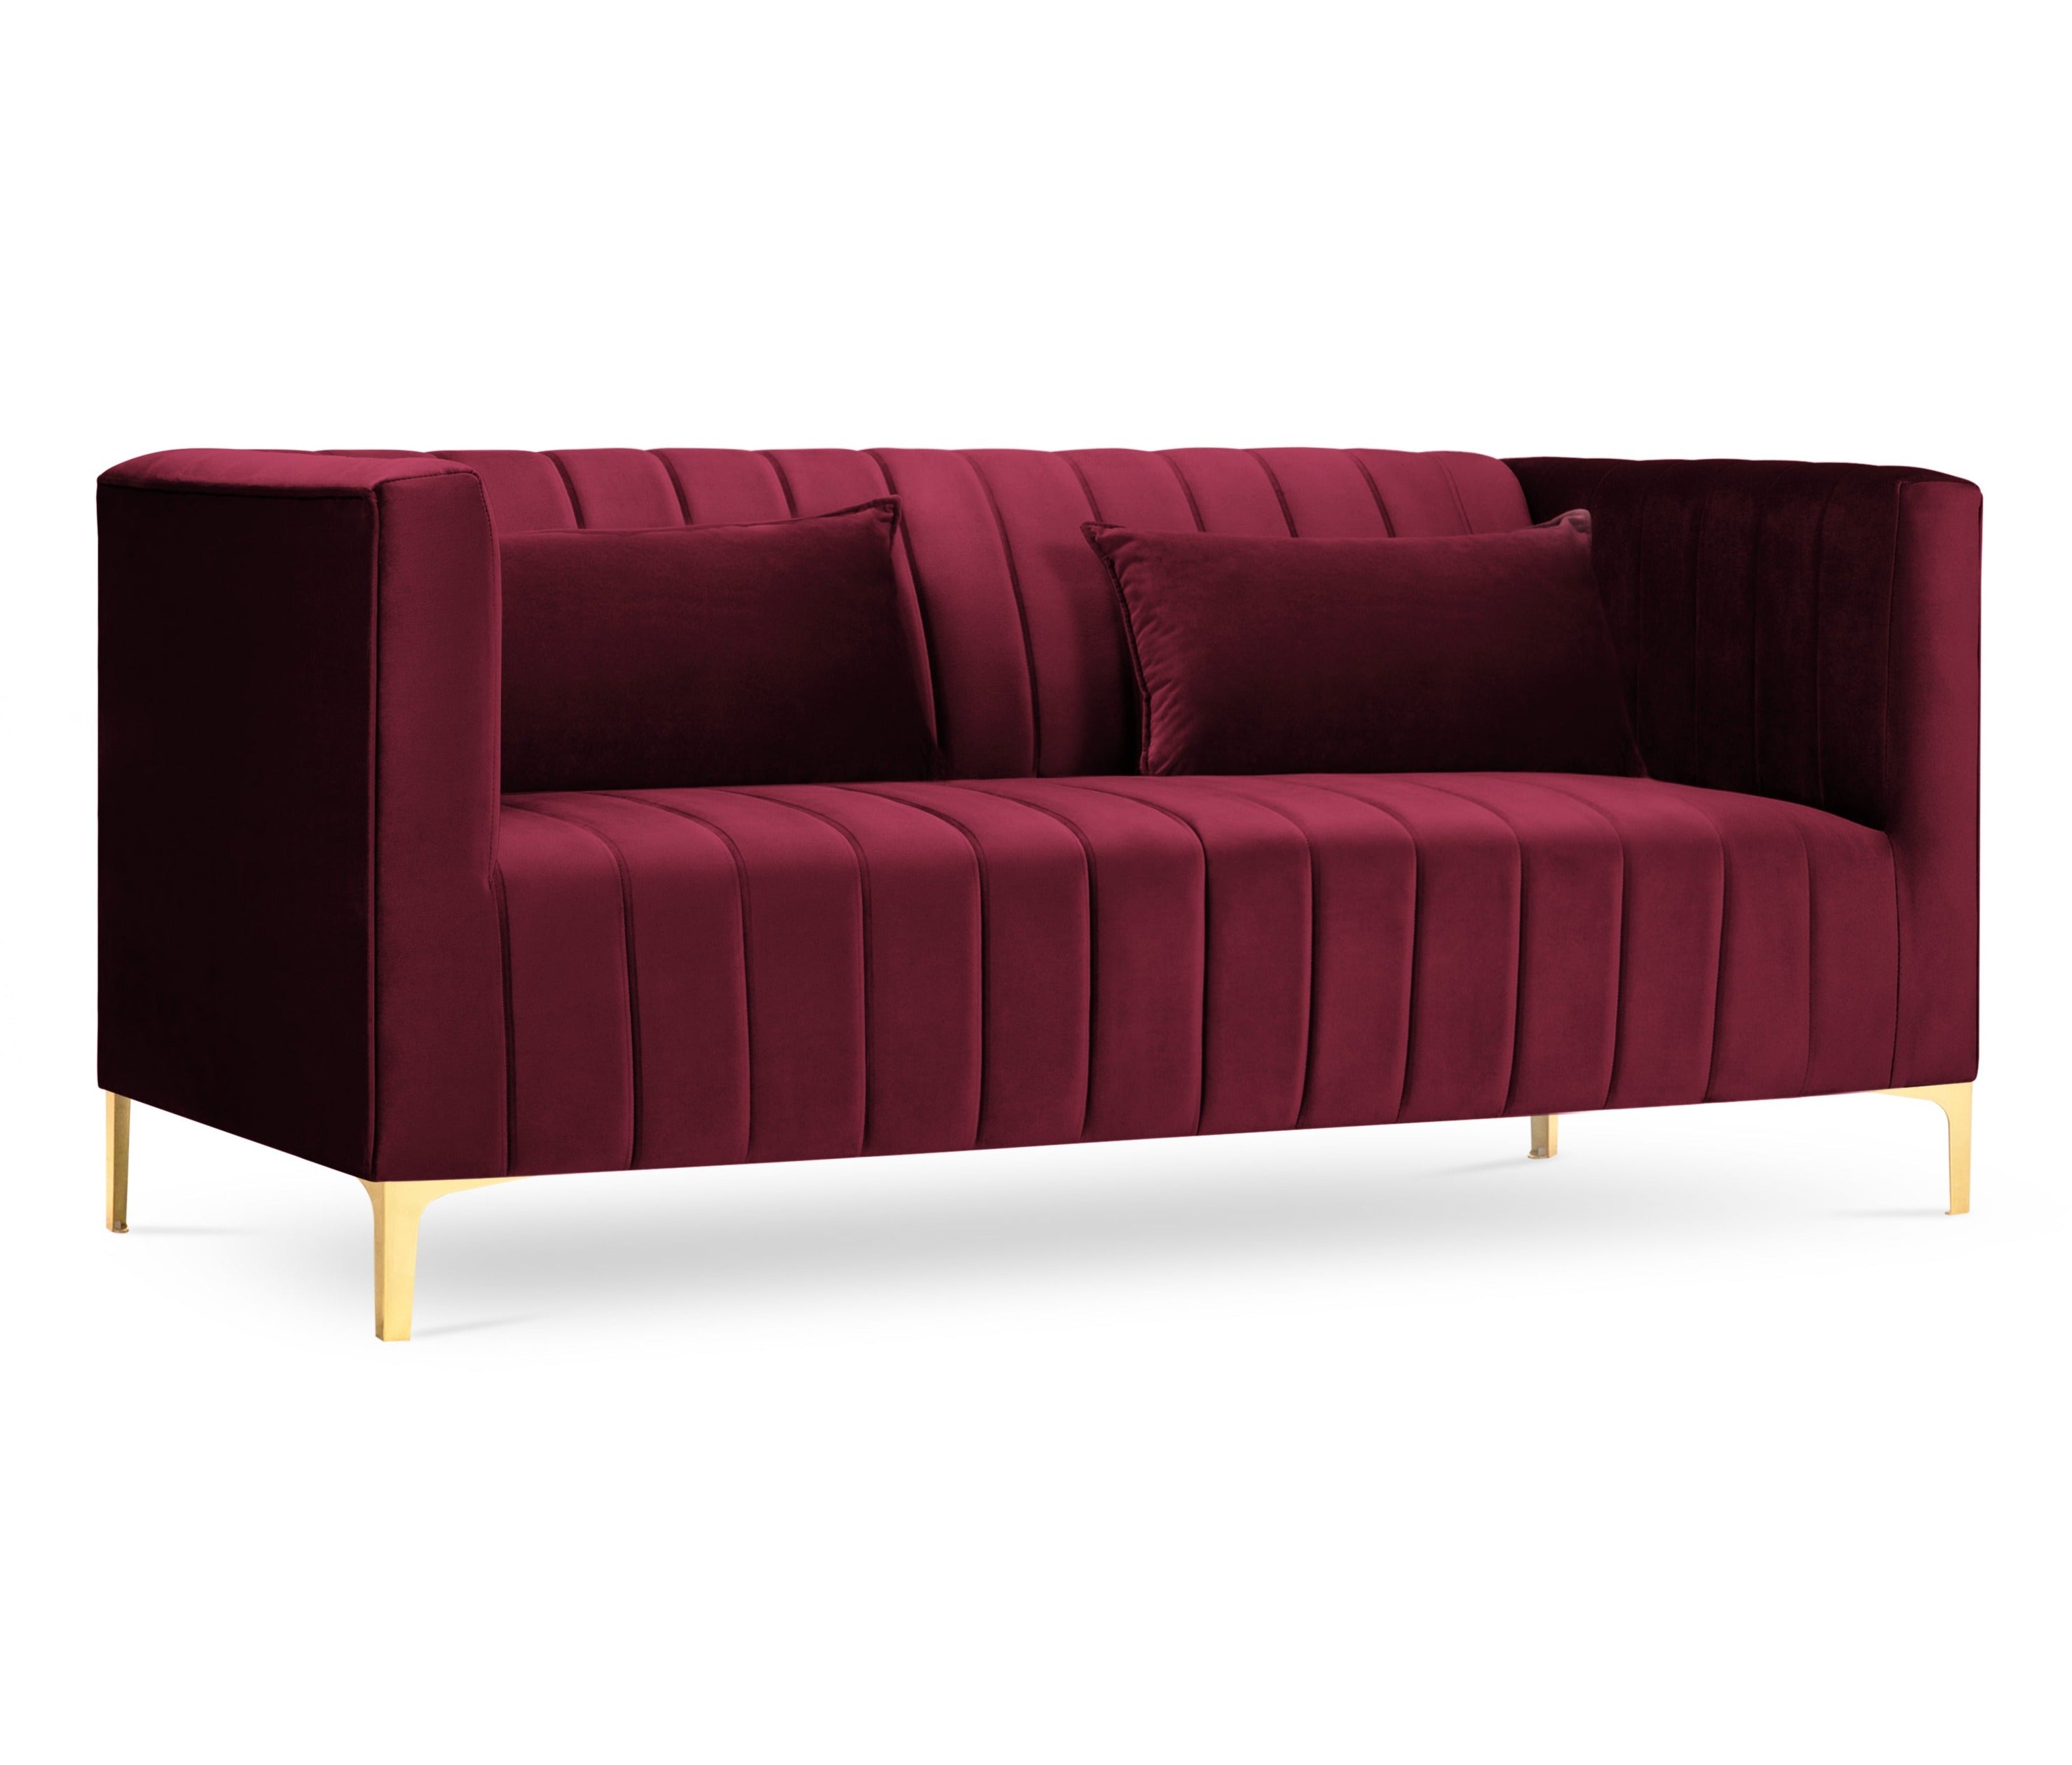 dark red sofa with a golden finish